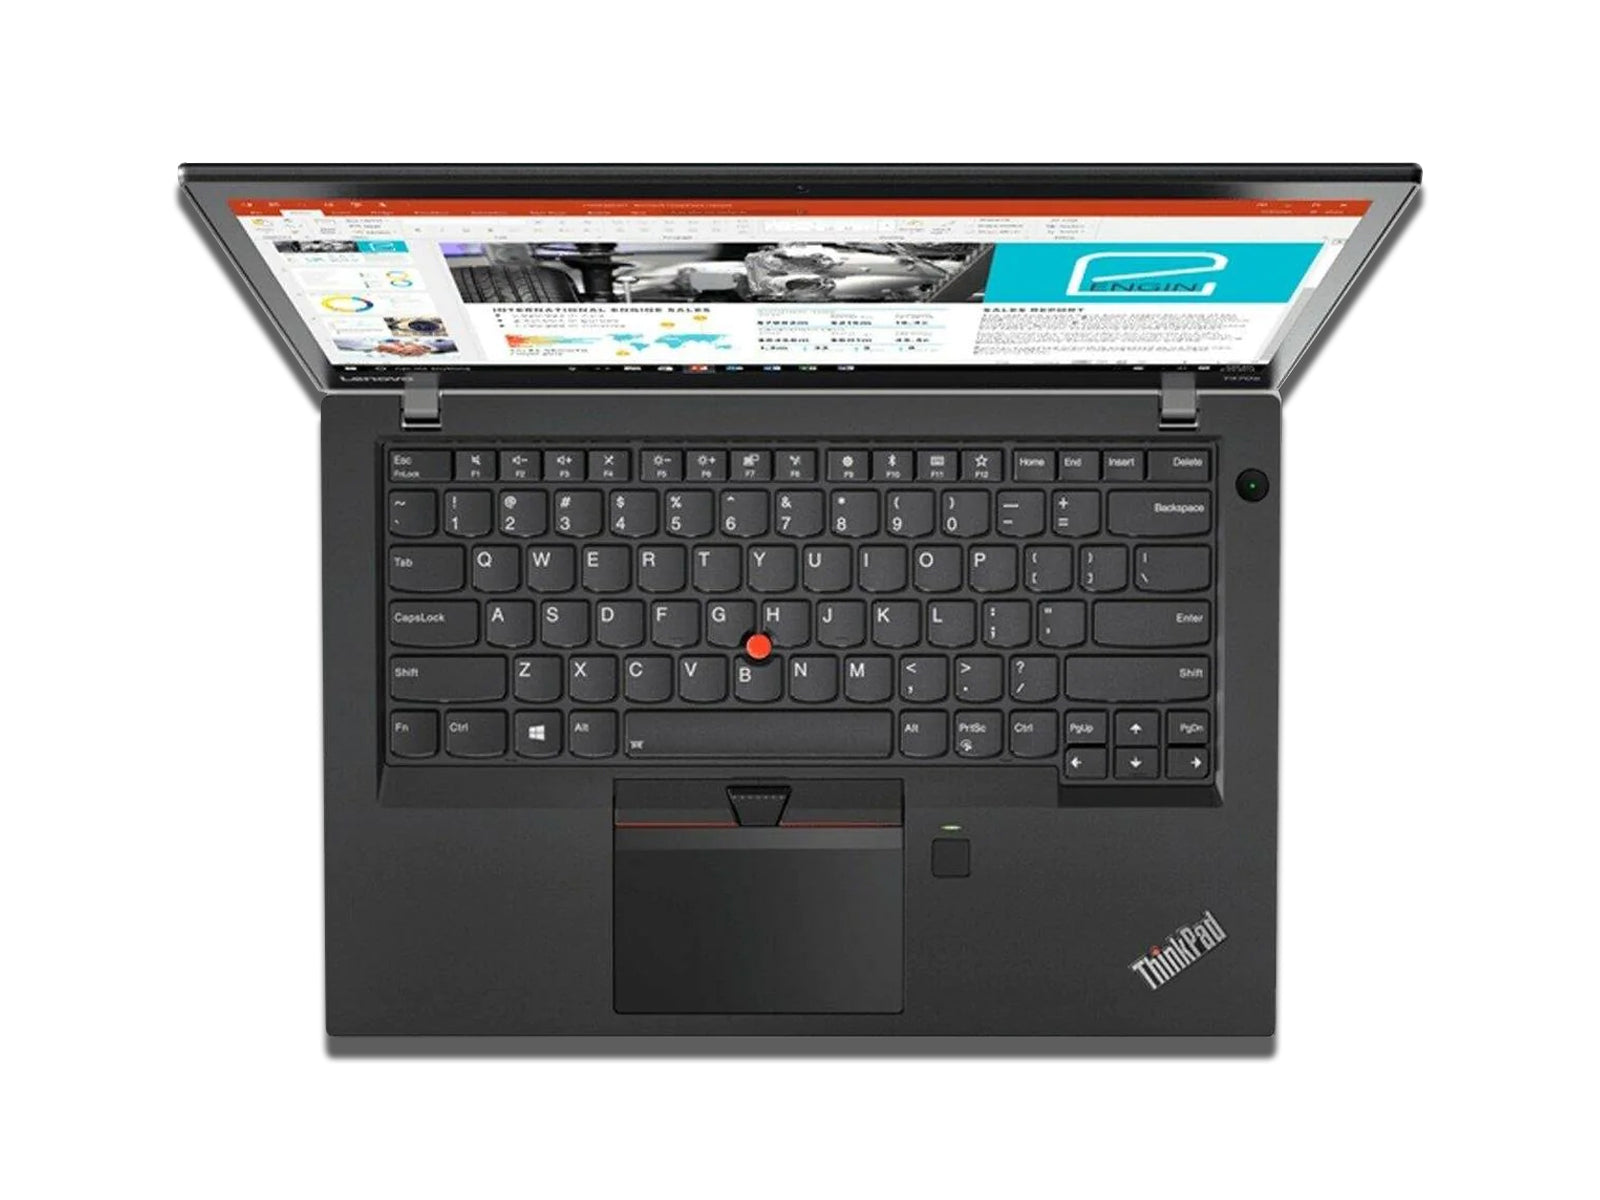 Keyboard View Image of The Lenovo T470s on The White Background